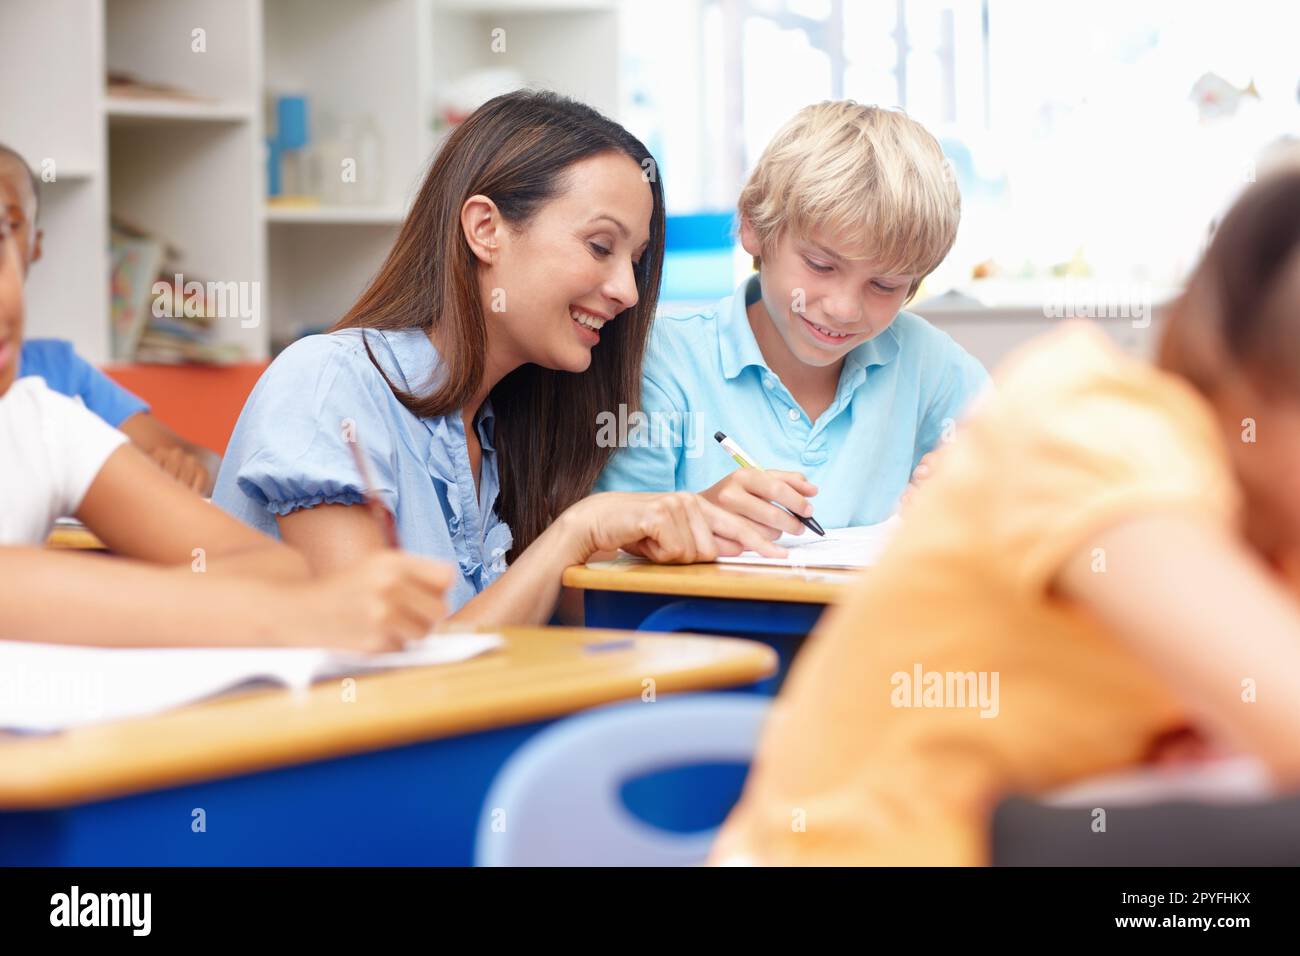 Ill help you. A happy young teacher helping out a student with his work. Stock Photo